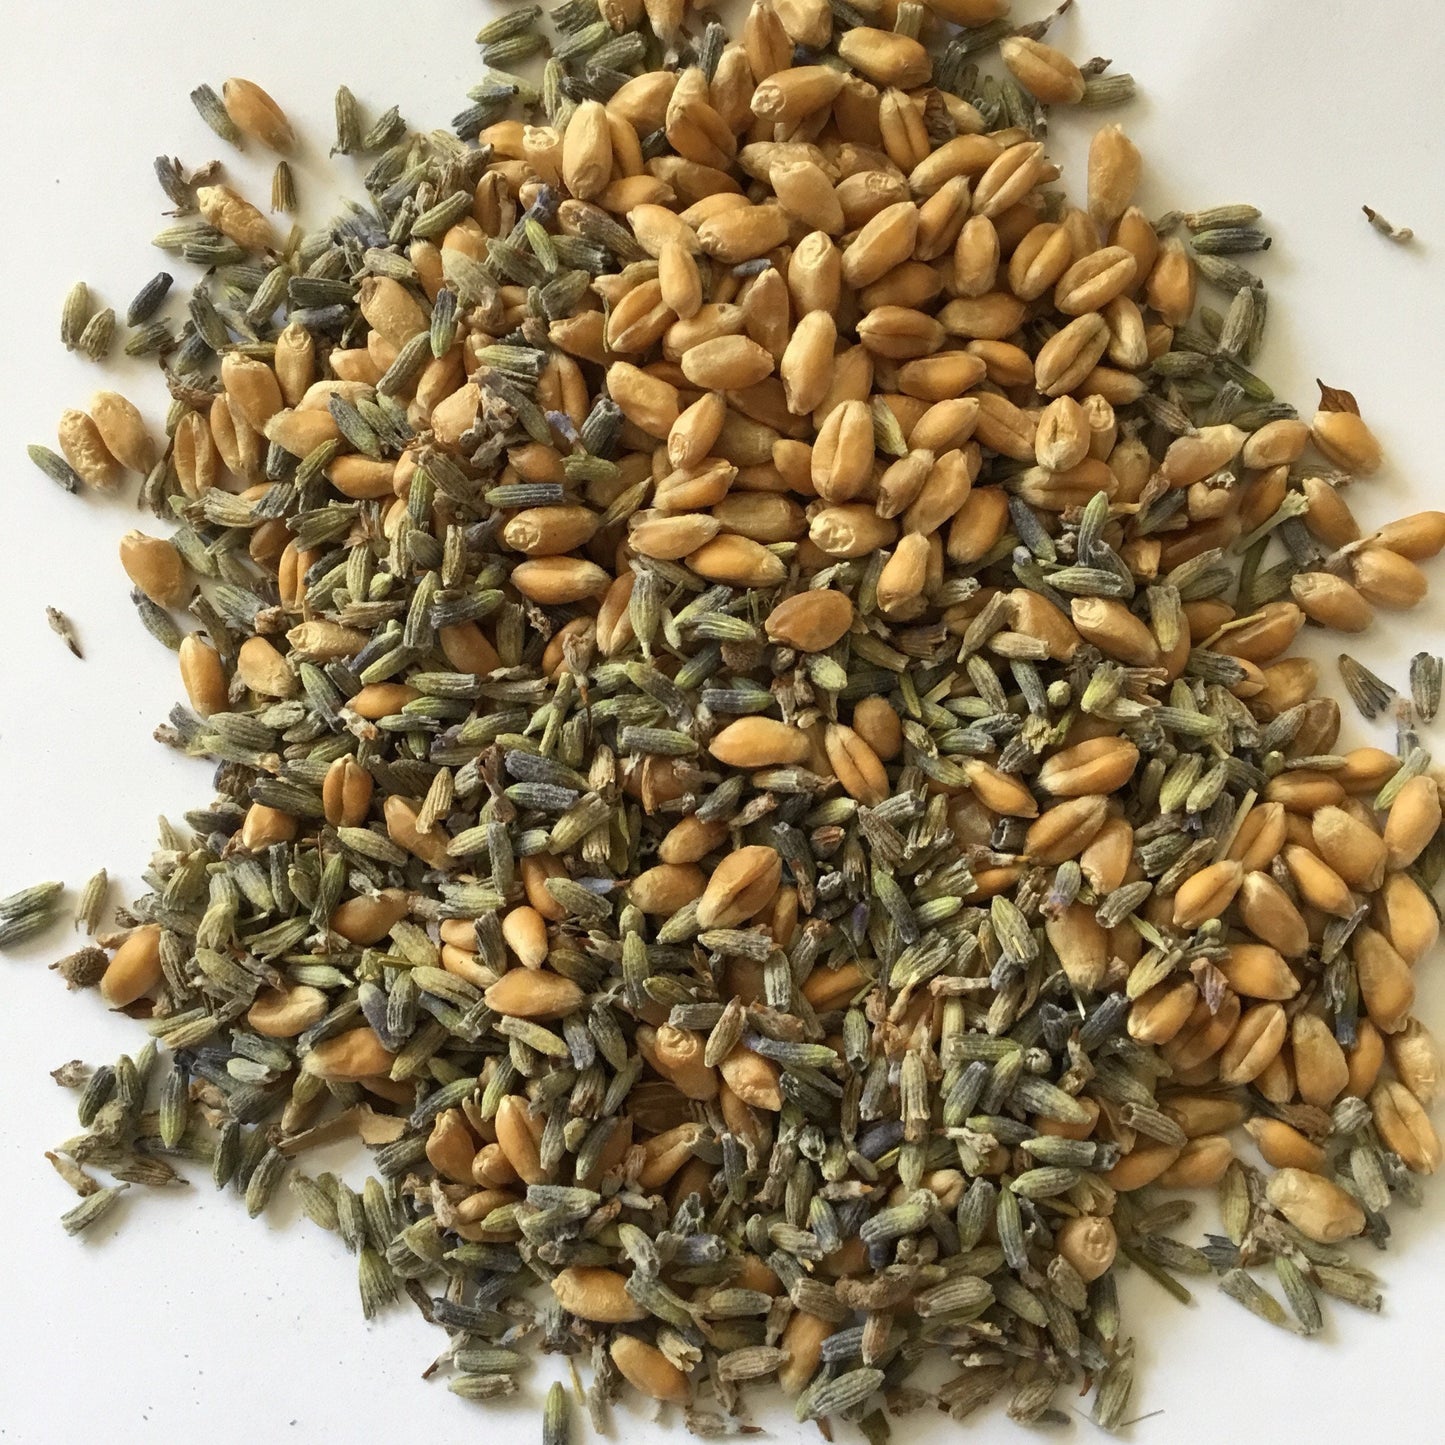 wheat bag ingredients used are whole clean wheat and lavender flower for fragrance and relaxation properties